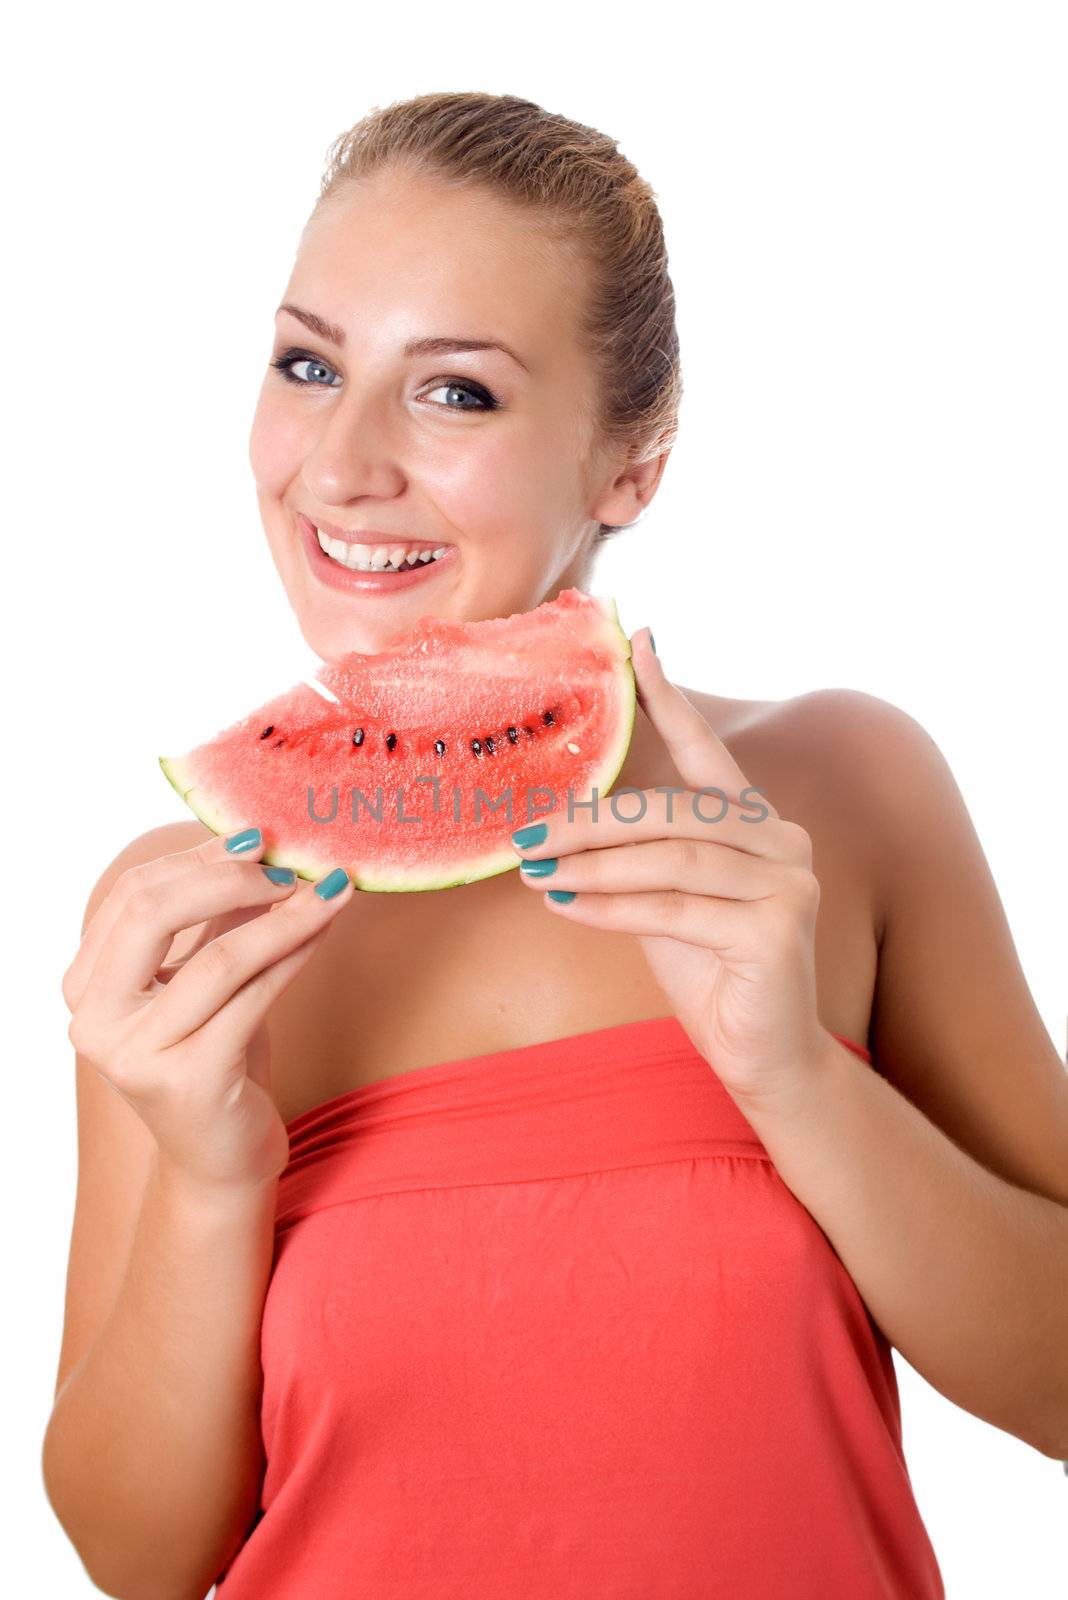 Woman against white background taking a bite of watermelon.